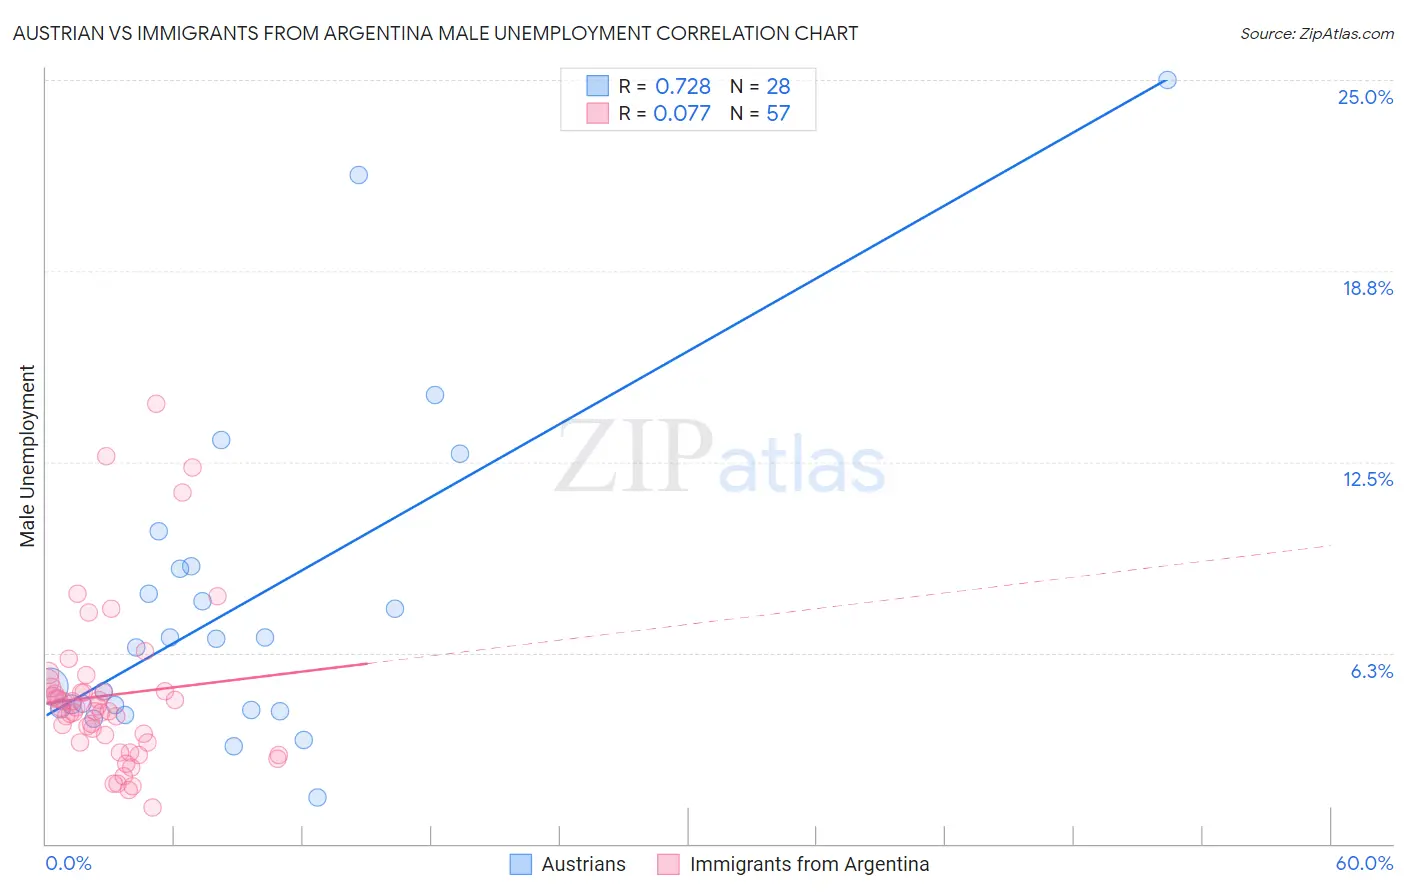 Austrian vs Immigrants from Argentina Male Unemployment